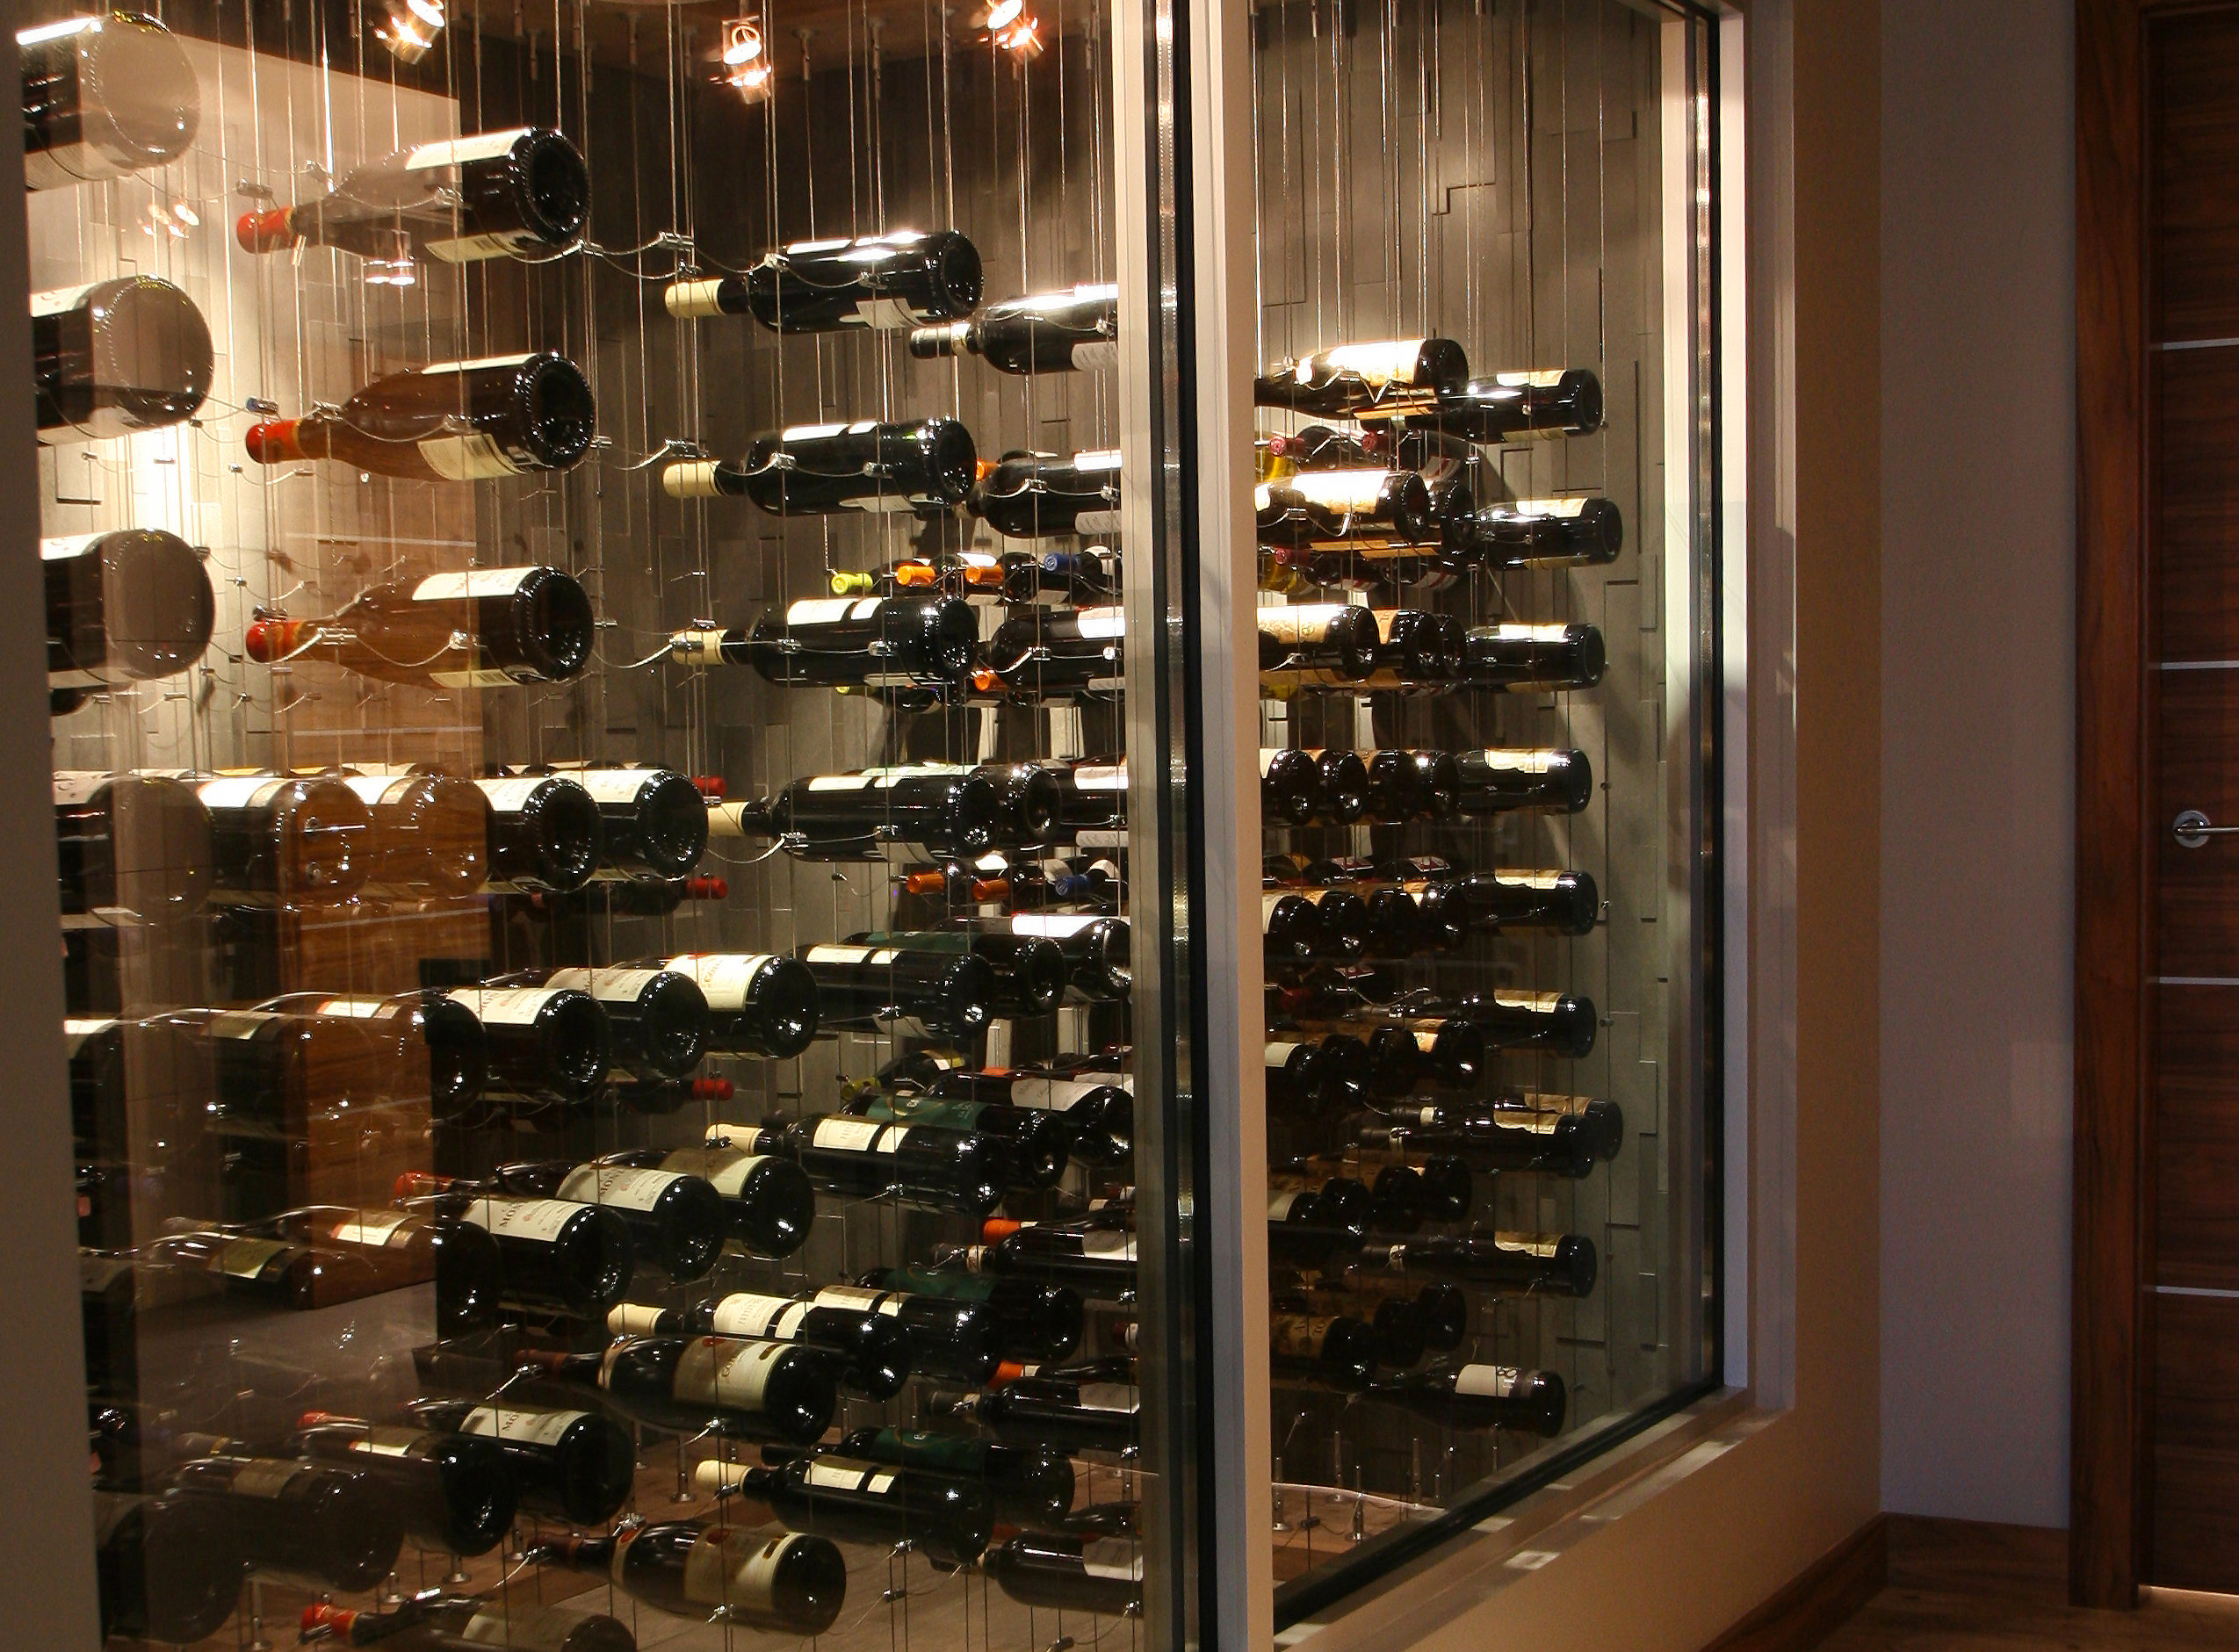 Get your own modern wine cellar design! Contact us!